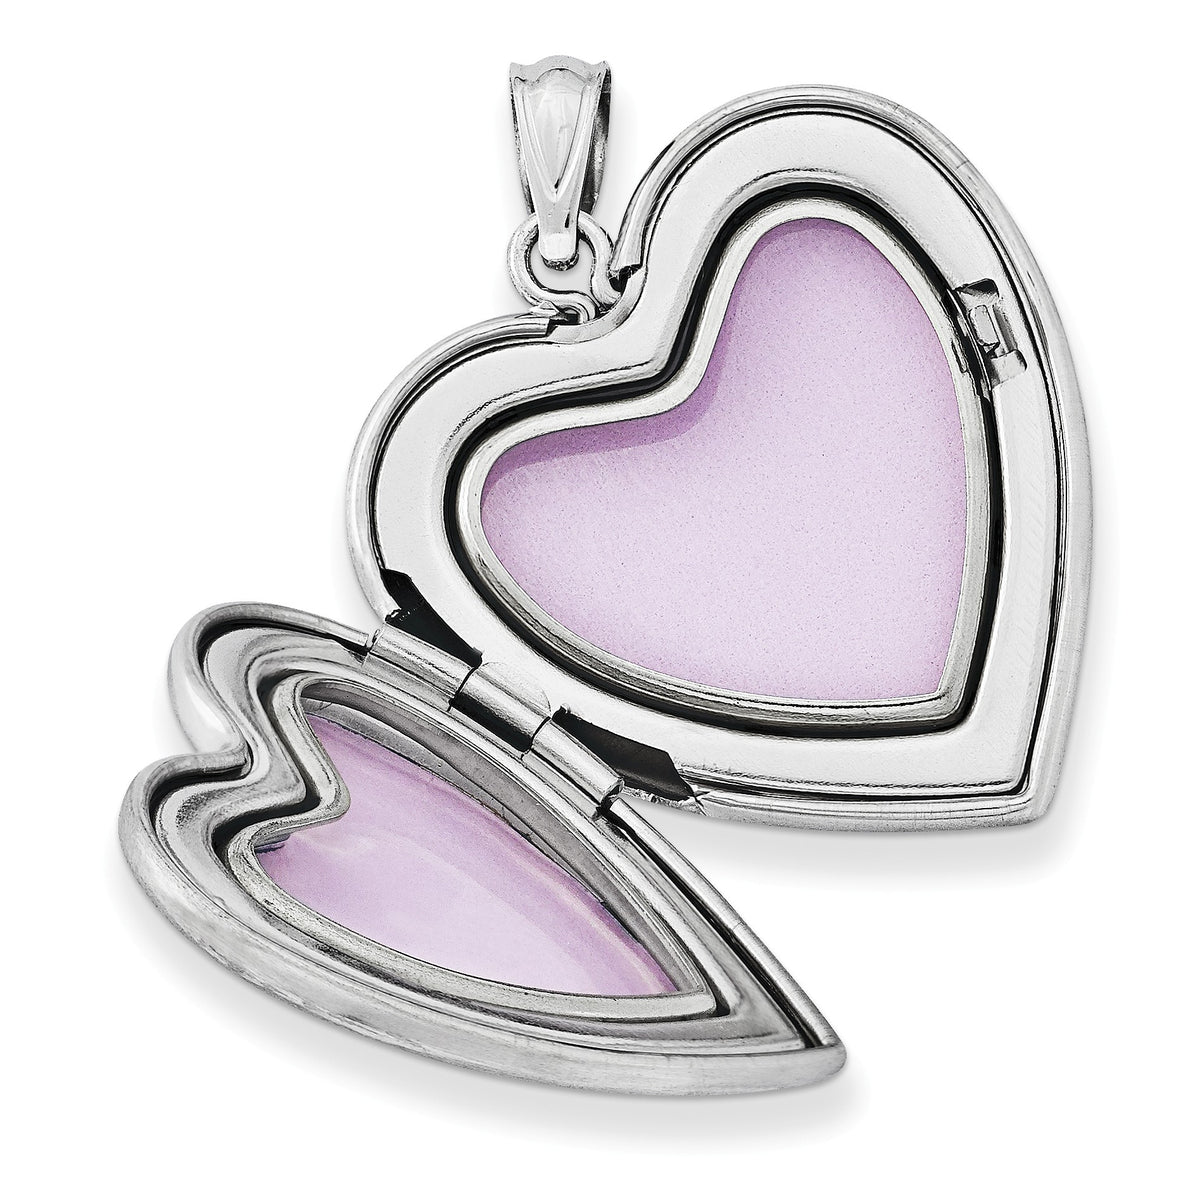 Alternate view of the Sterling Silver and Enameled Rose Heart Locket, 24mm by The Black Bow Jewelry Co.